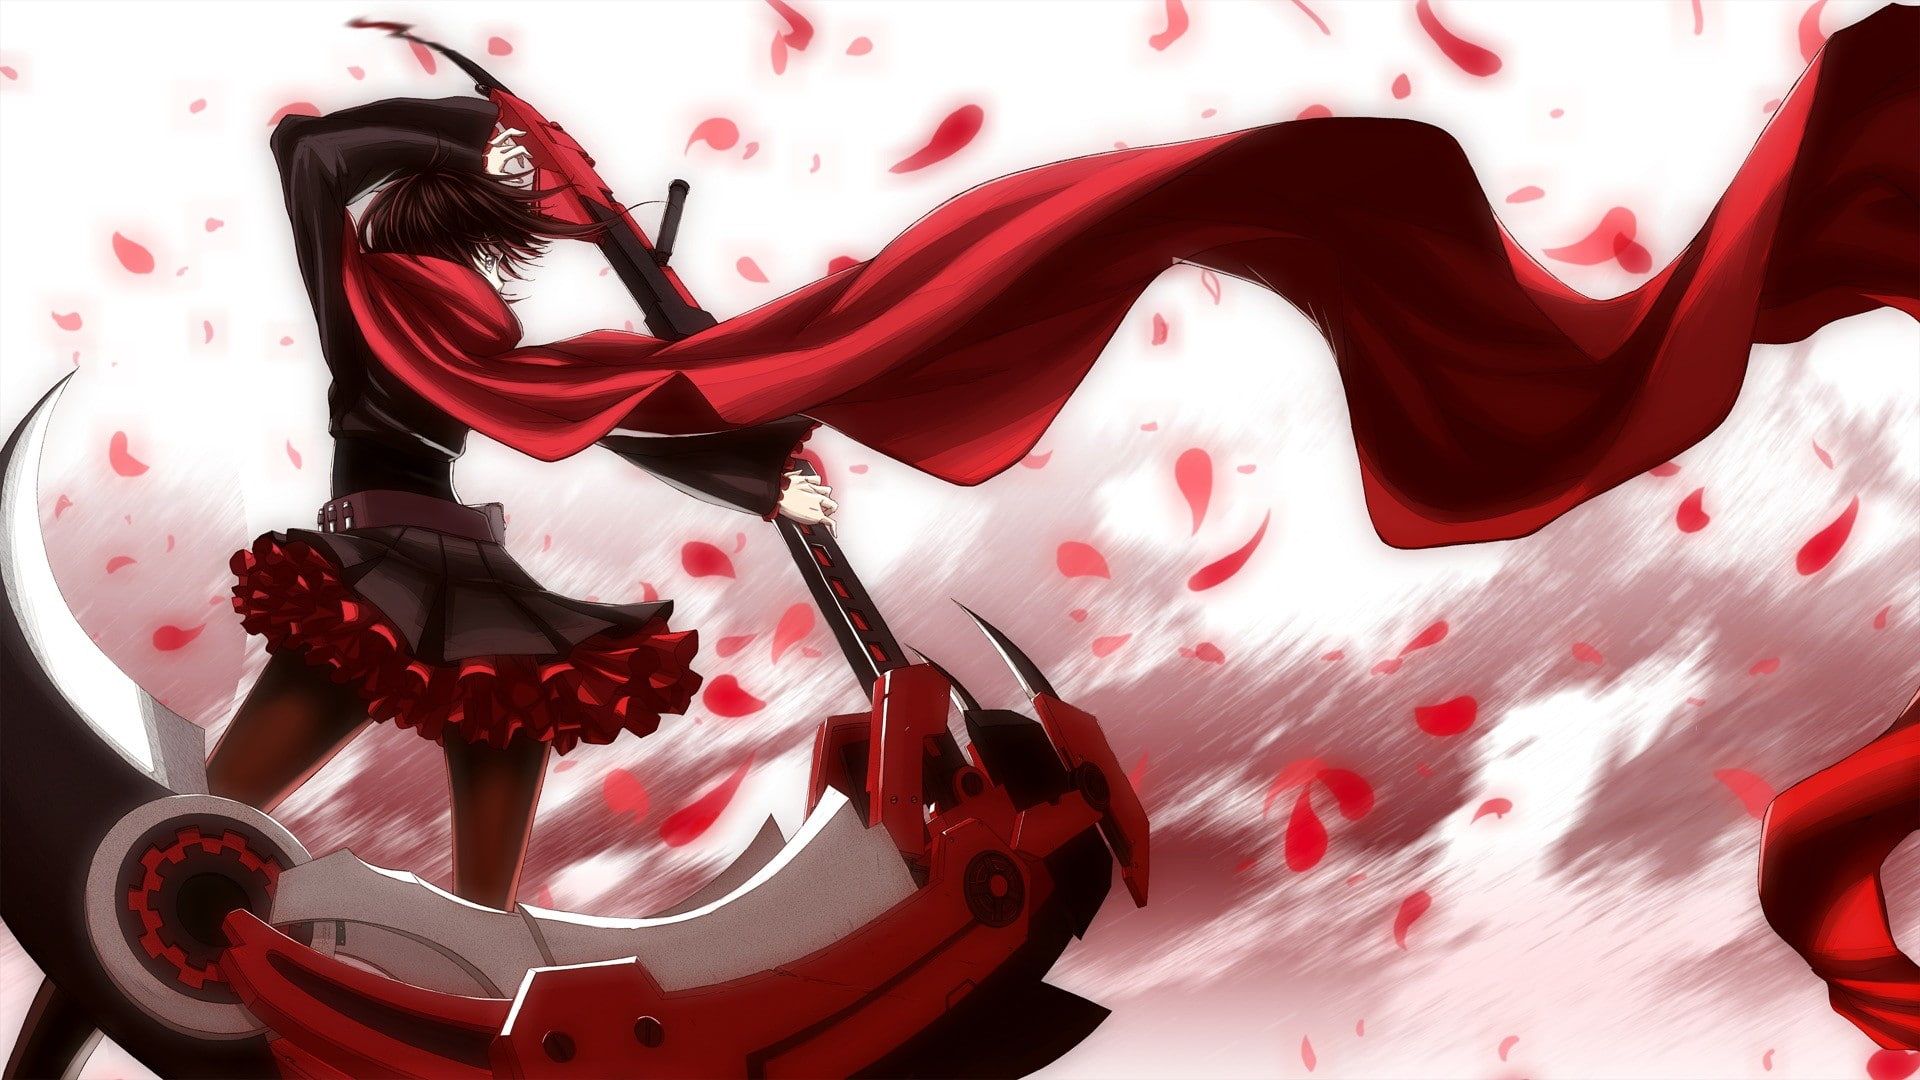 Ruby Rose (character), anime, RWBY, flower petals, anime girls